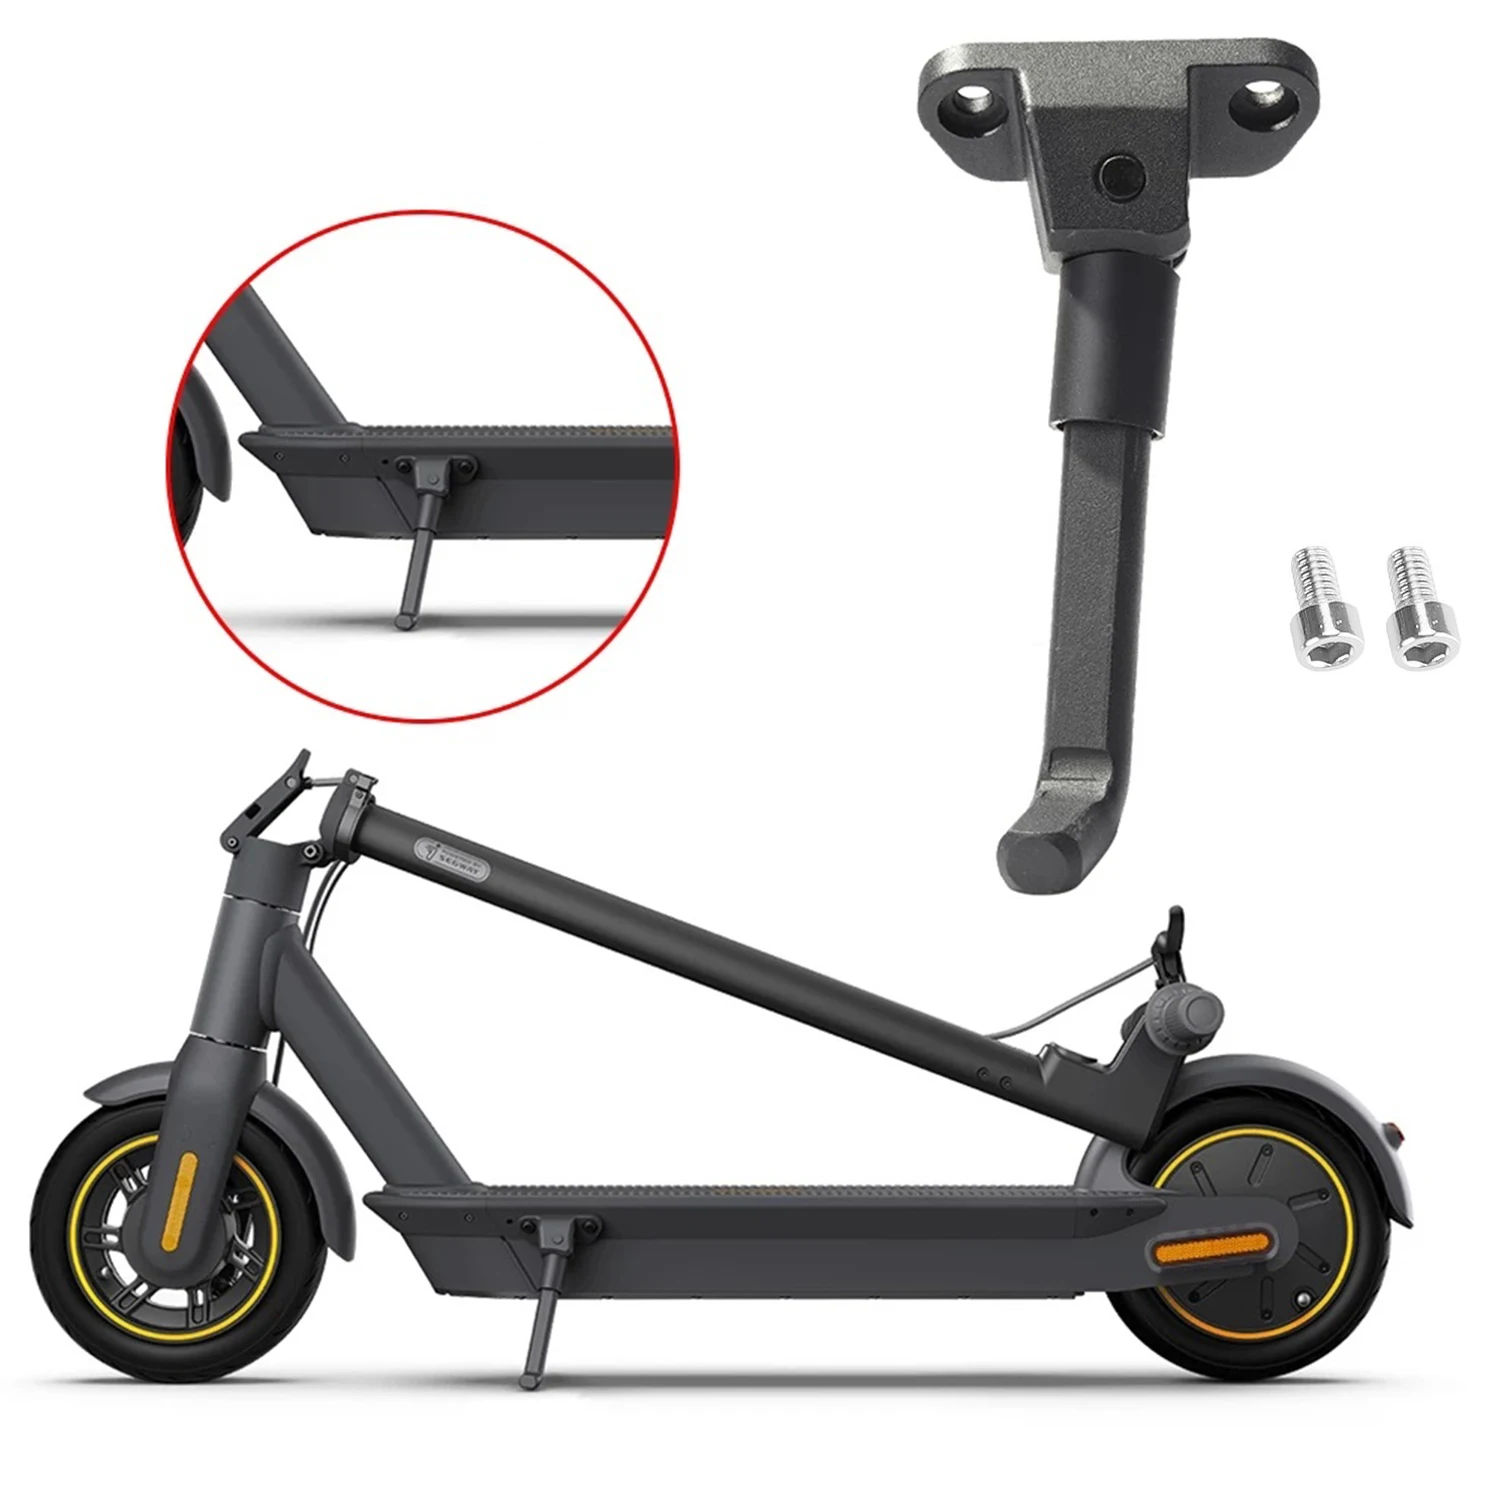 

Parking Stand Kickstand For Ninebot MAX G30 G30D Electric Scooter Foot Support/G30 Max kickstand Accessories Scooter Parts